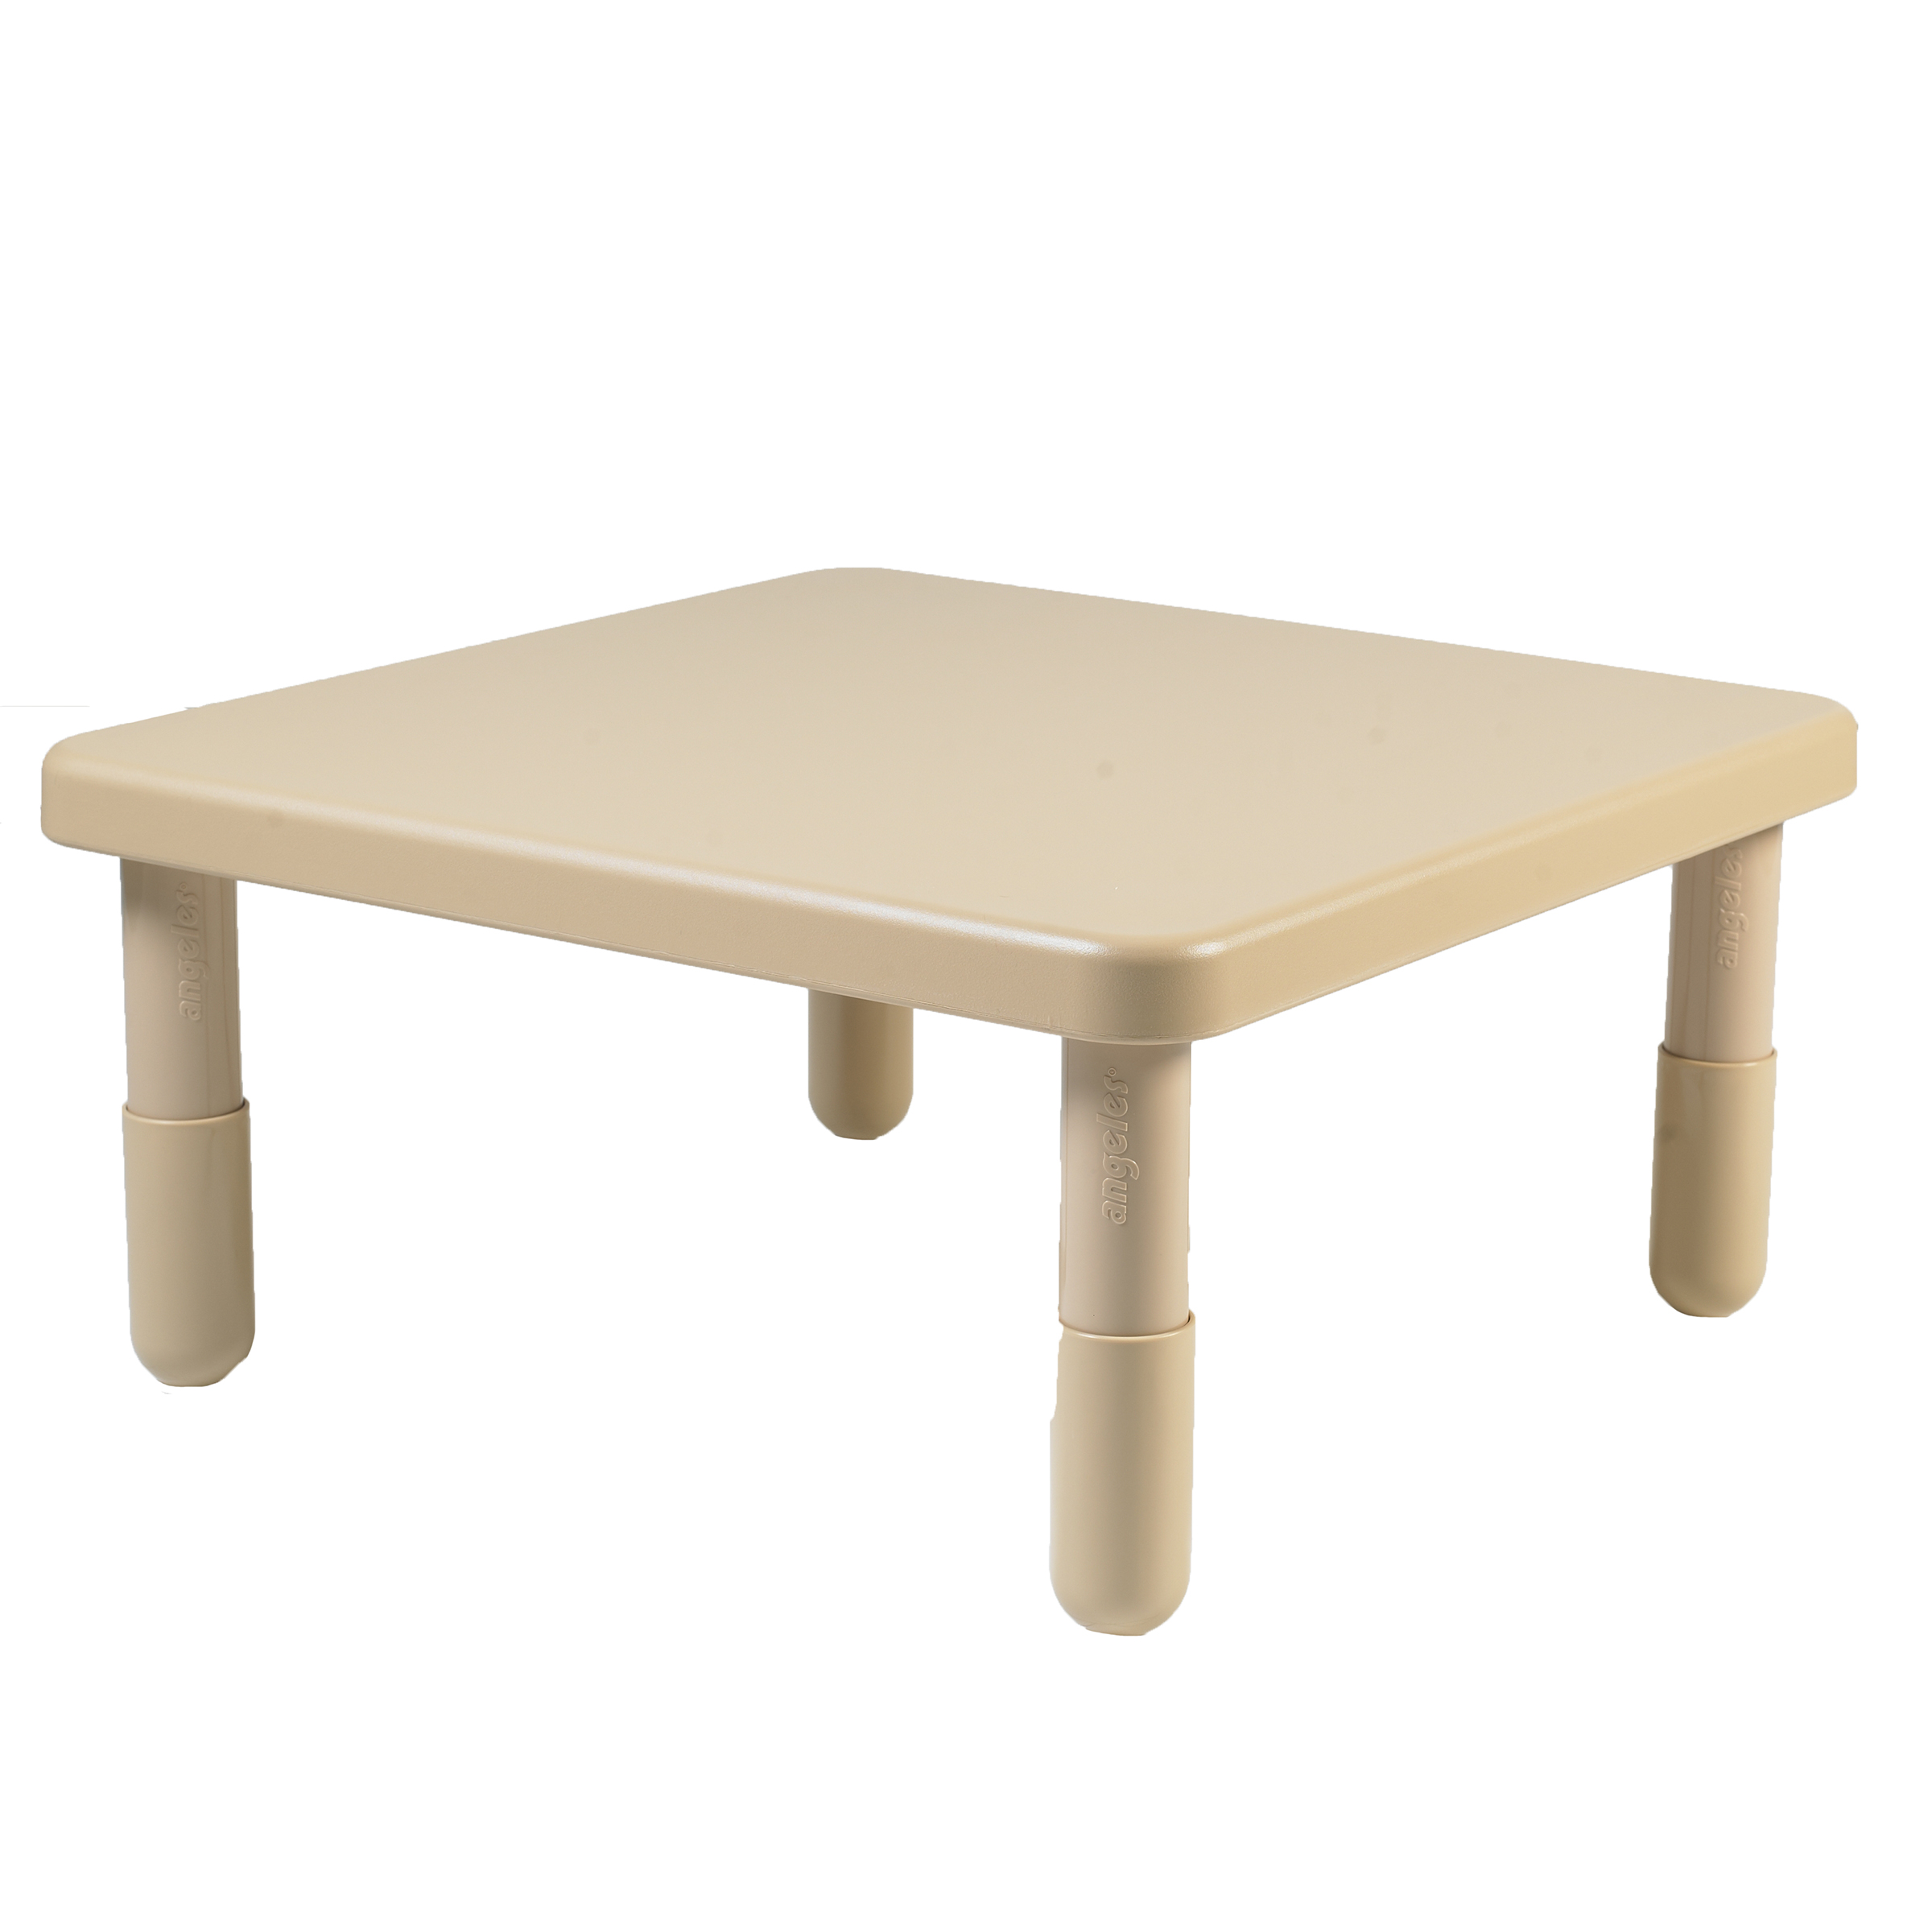 Value 71 cm  Square Table - Natural Tan with 35,5 cm  Legs